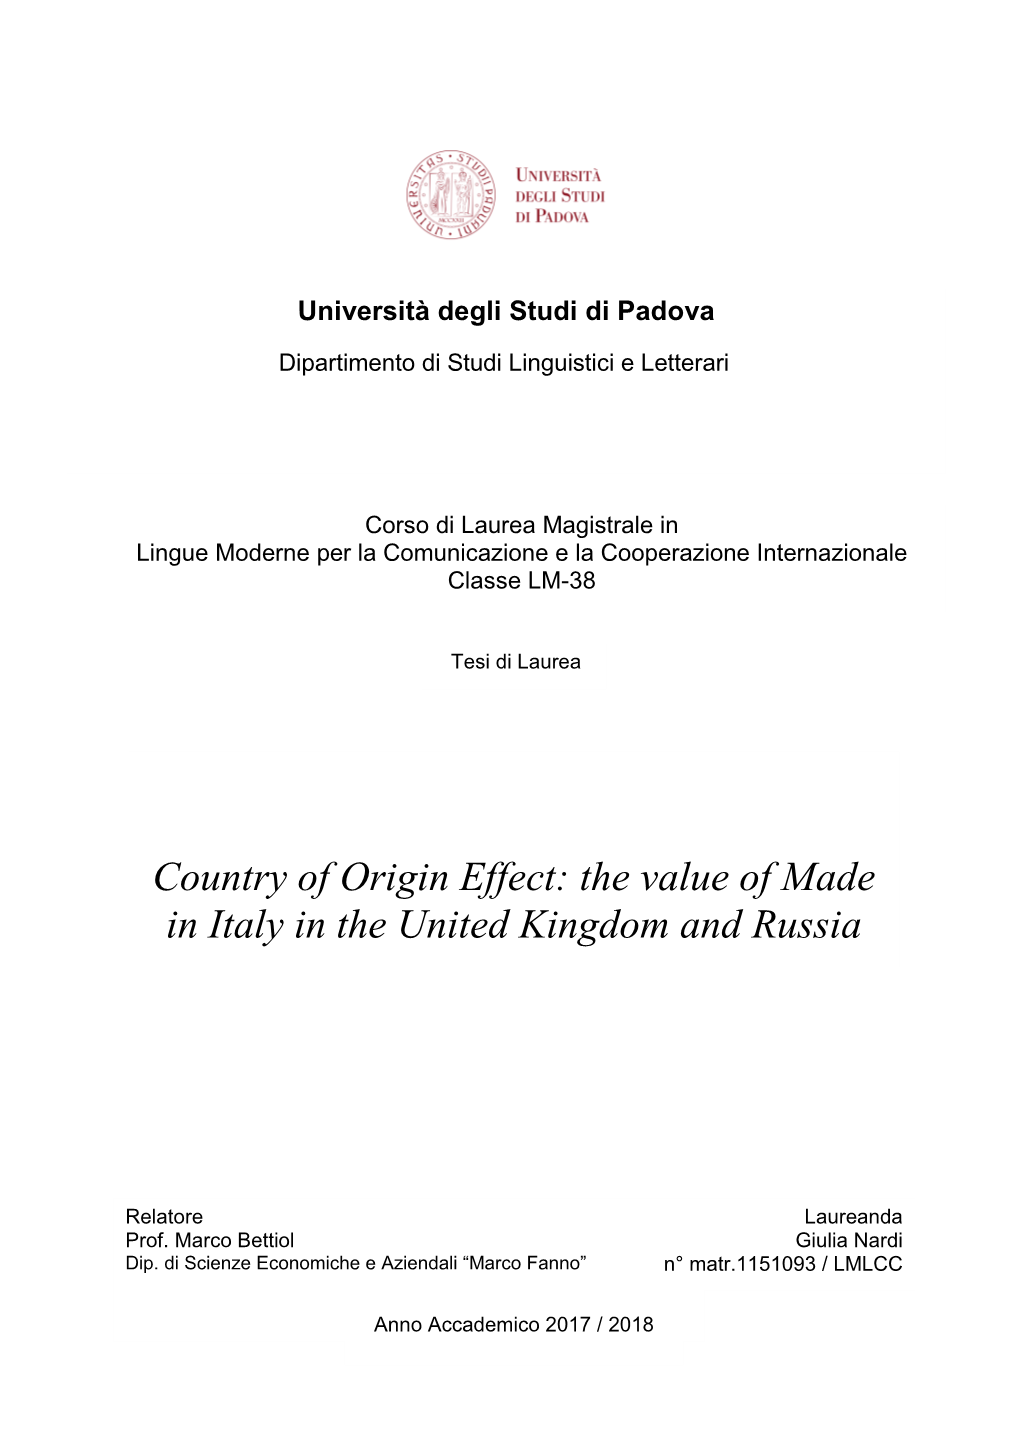 Country of Origin Effect: the Value of Made in Italy in the United Kingdom and Russia